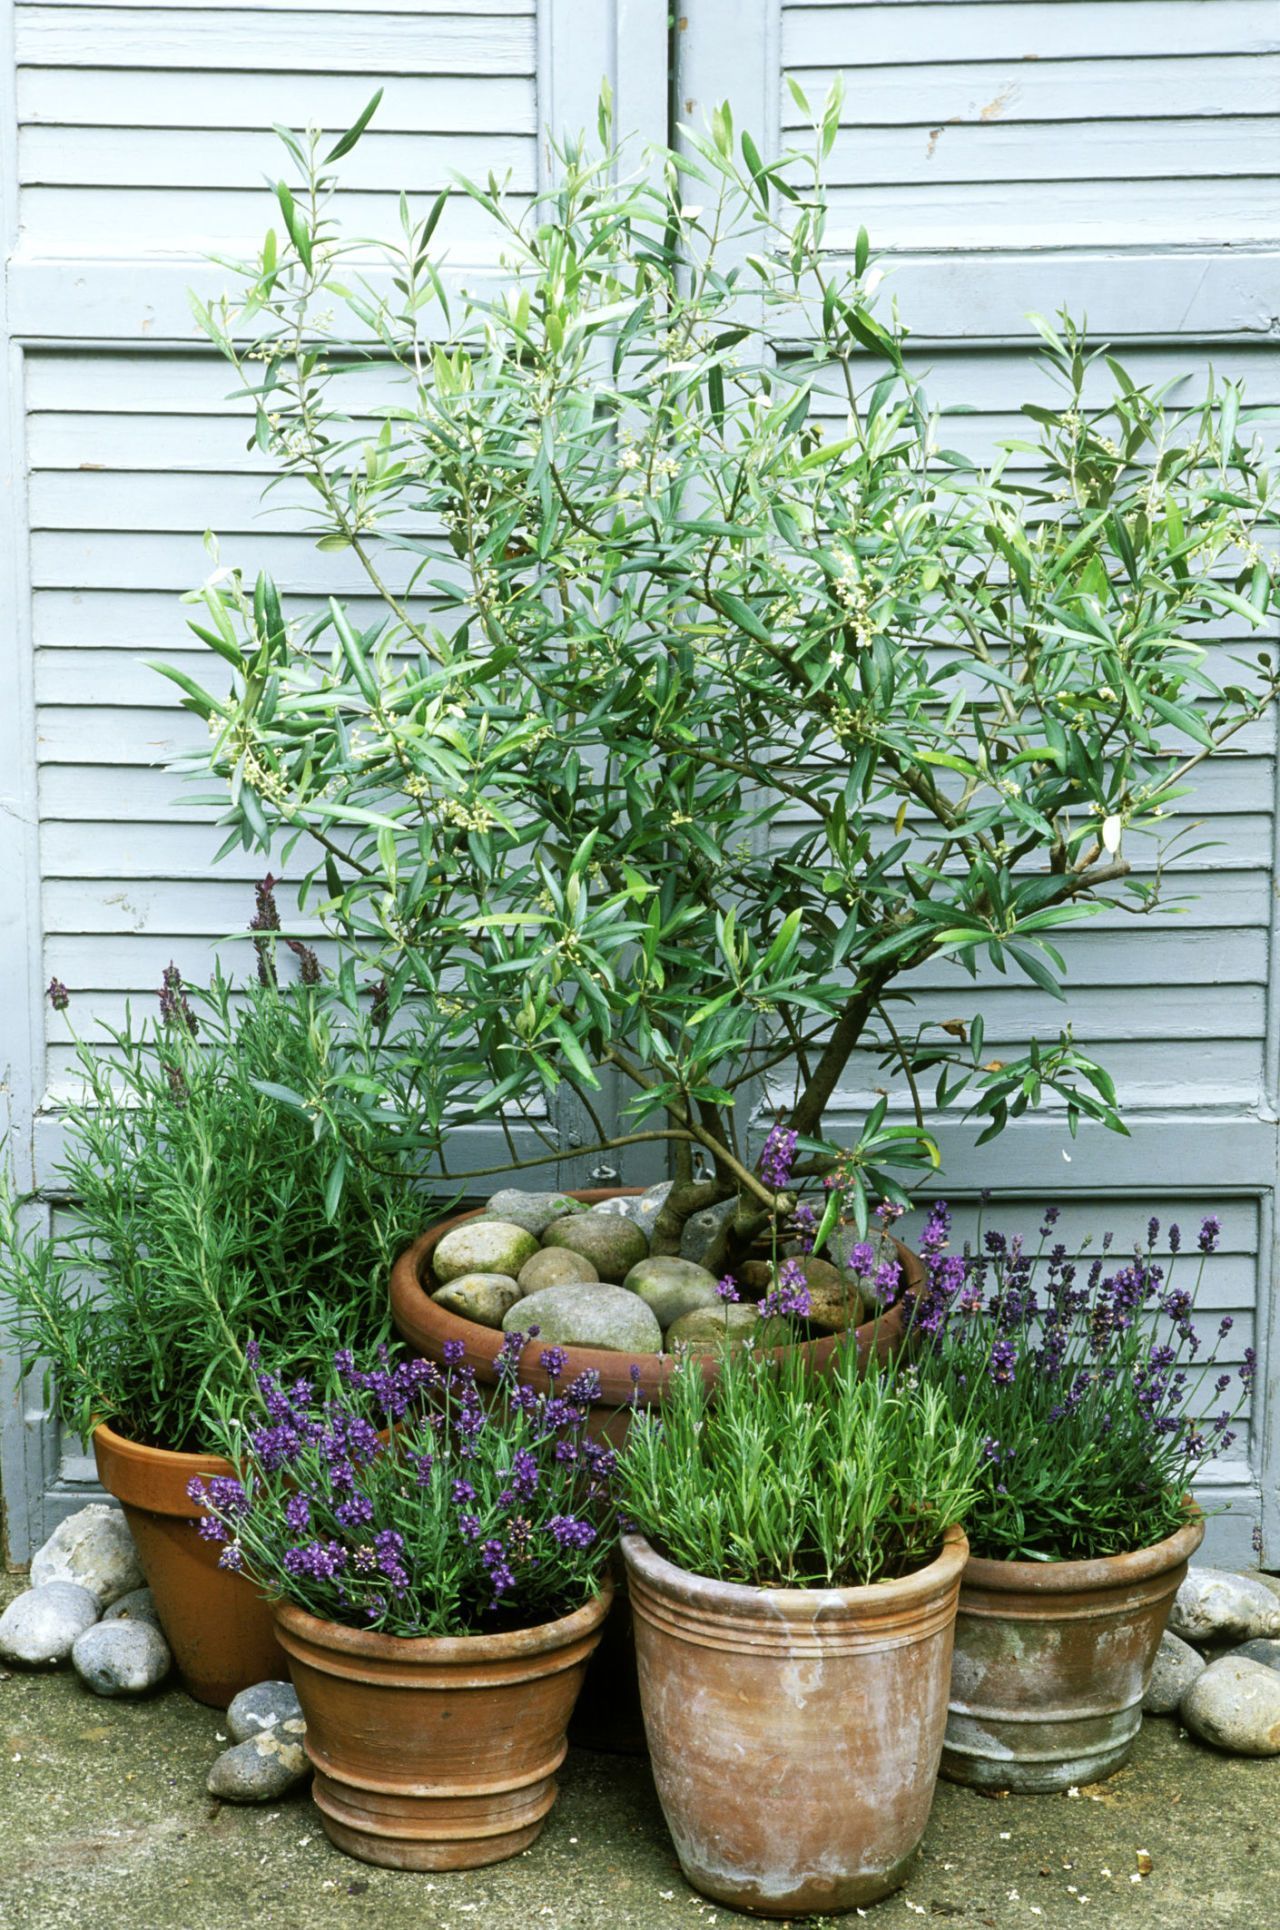 This is why you need olive trees in your home and garden